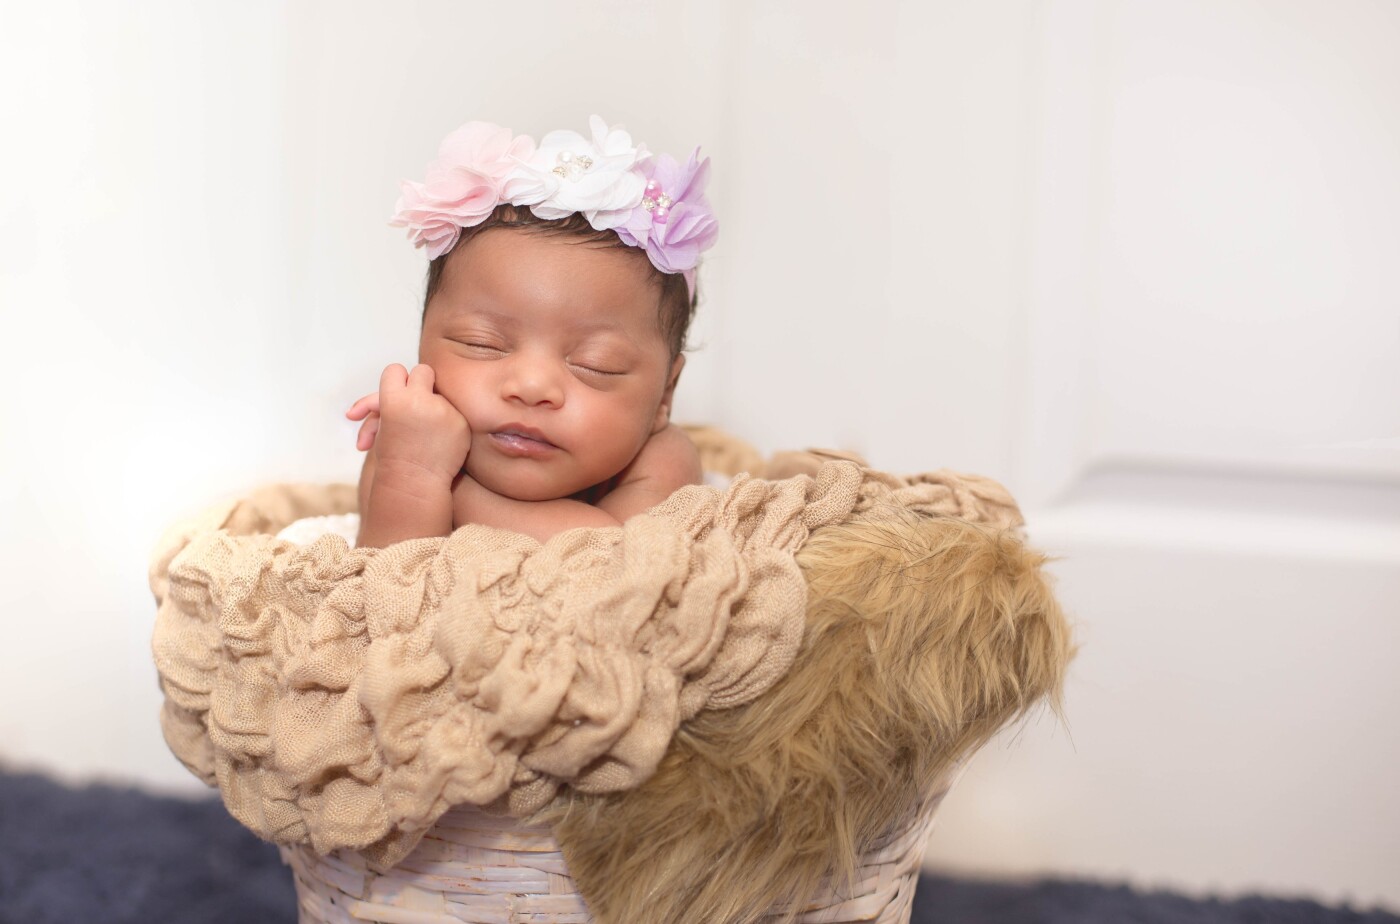 Newborn sessions don’t always go as planned. This was Amara's second time visiting me in her 1st couple weeks in this world. I’m so glad we were able to capture this cute image and can you believe this was my first composite? All I can say is Adorable, Welcome Baby Amara!!!